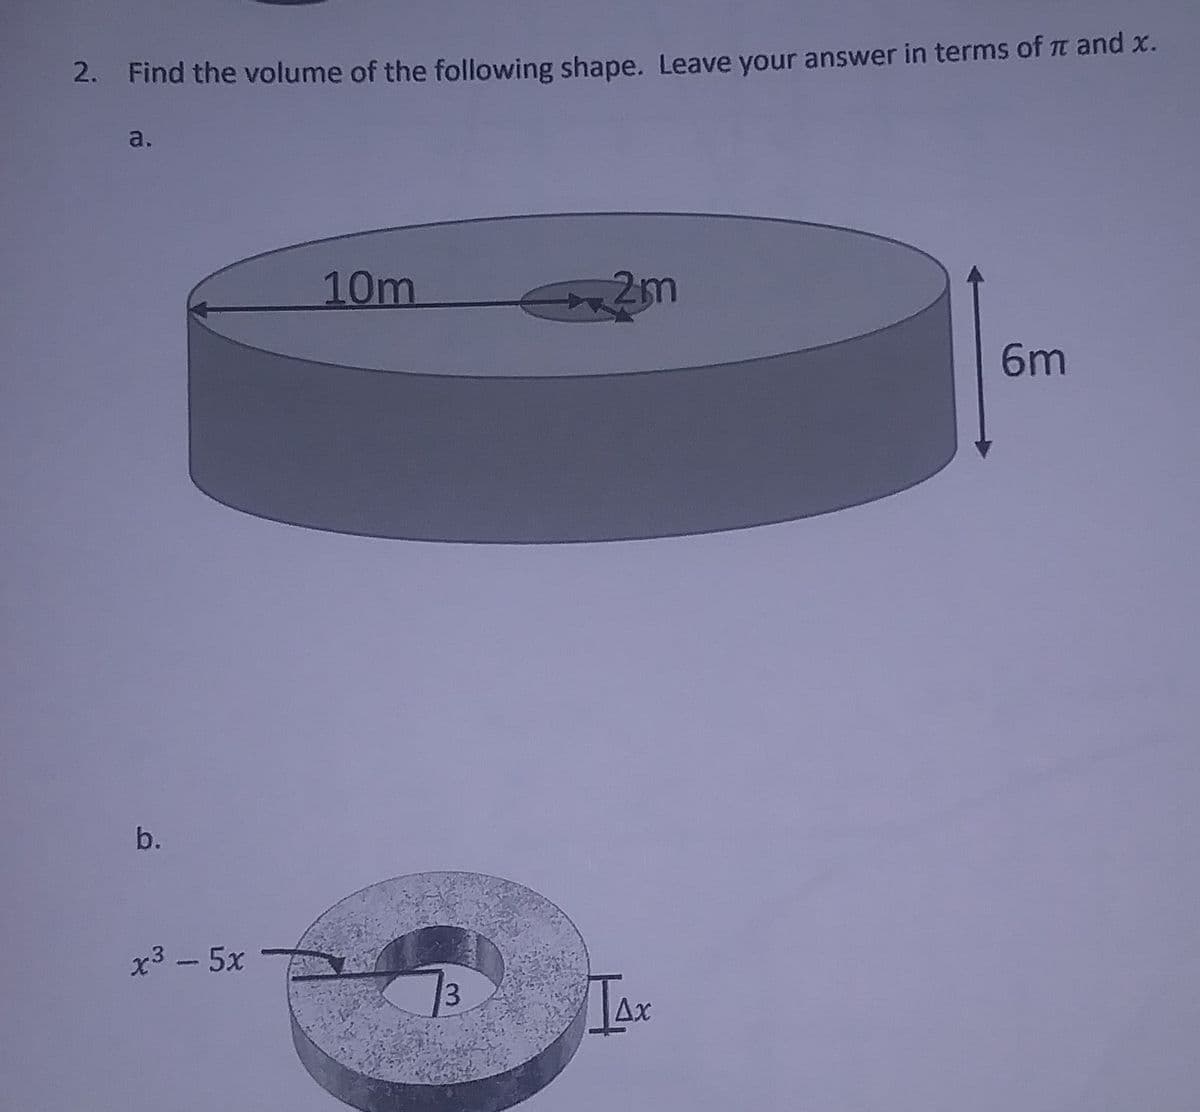 2. Find the volume of the following shape. Leave your answer in terms of Tt and x.
a.
10m
2m
6m
b.
x3 - 5x
73
Ax
